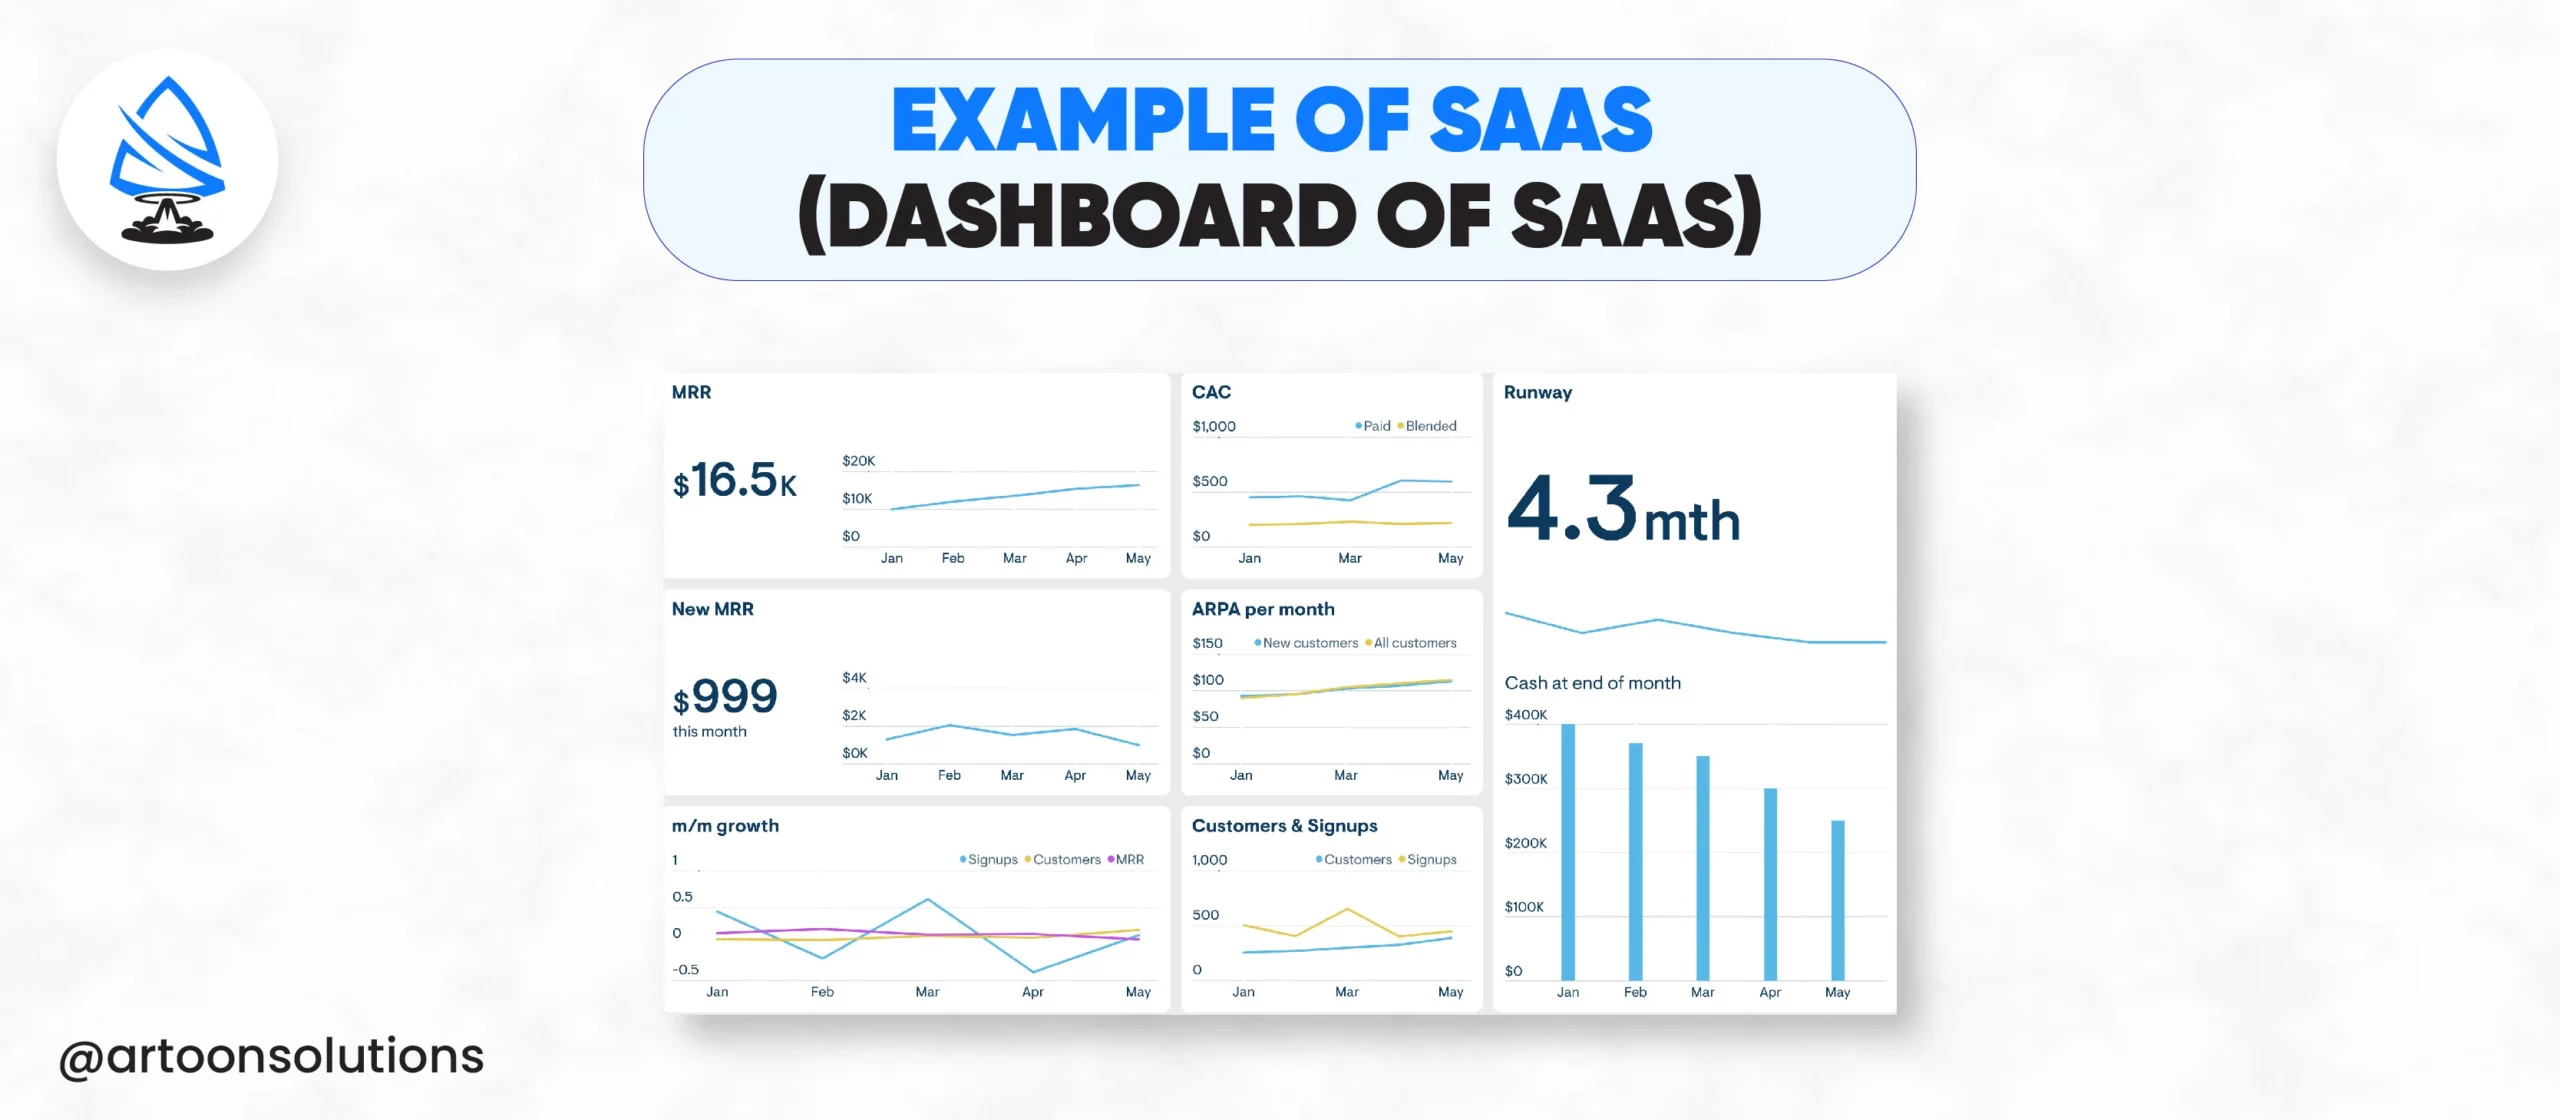 Overview of SaaS Industry Growth